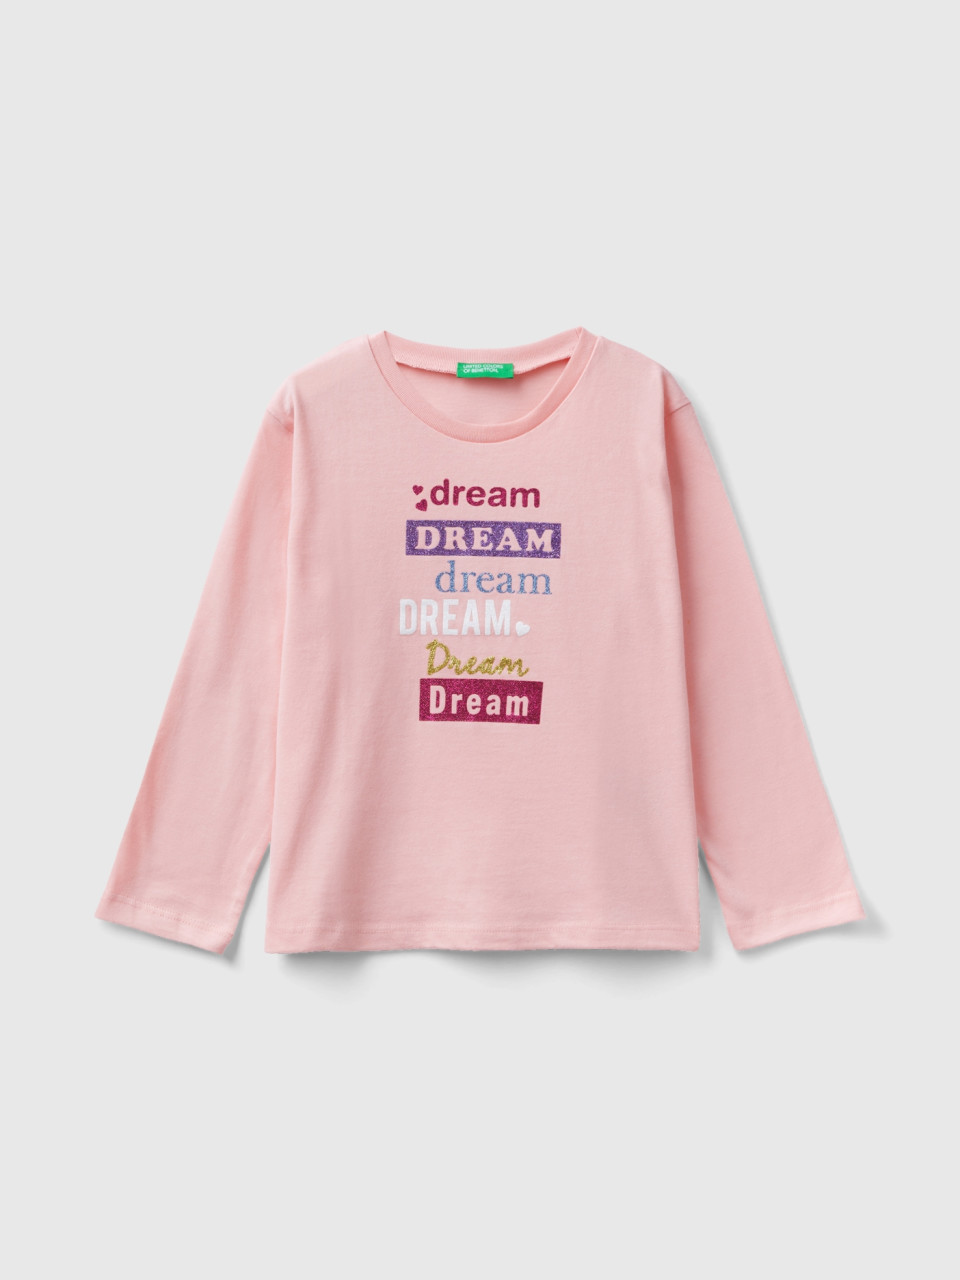 Benetton, Warm T-shirt With Print And Glitter, Pink, Kids